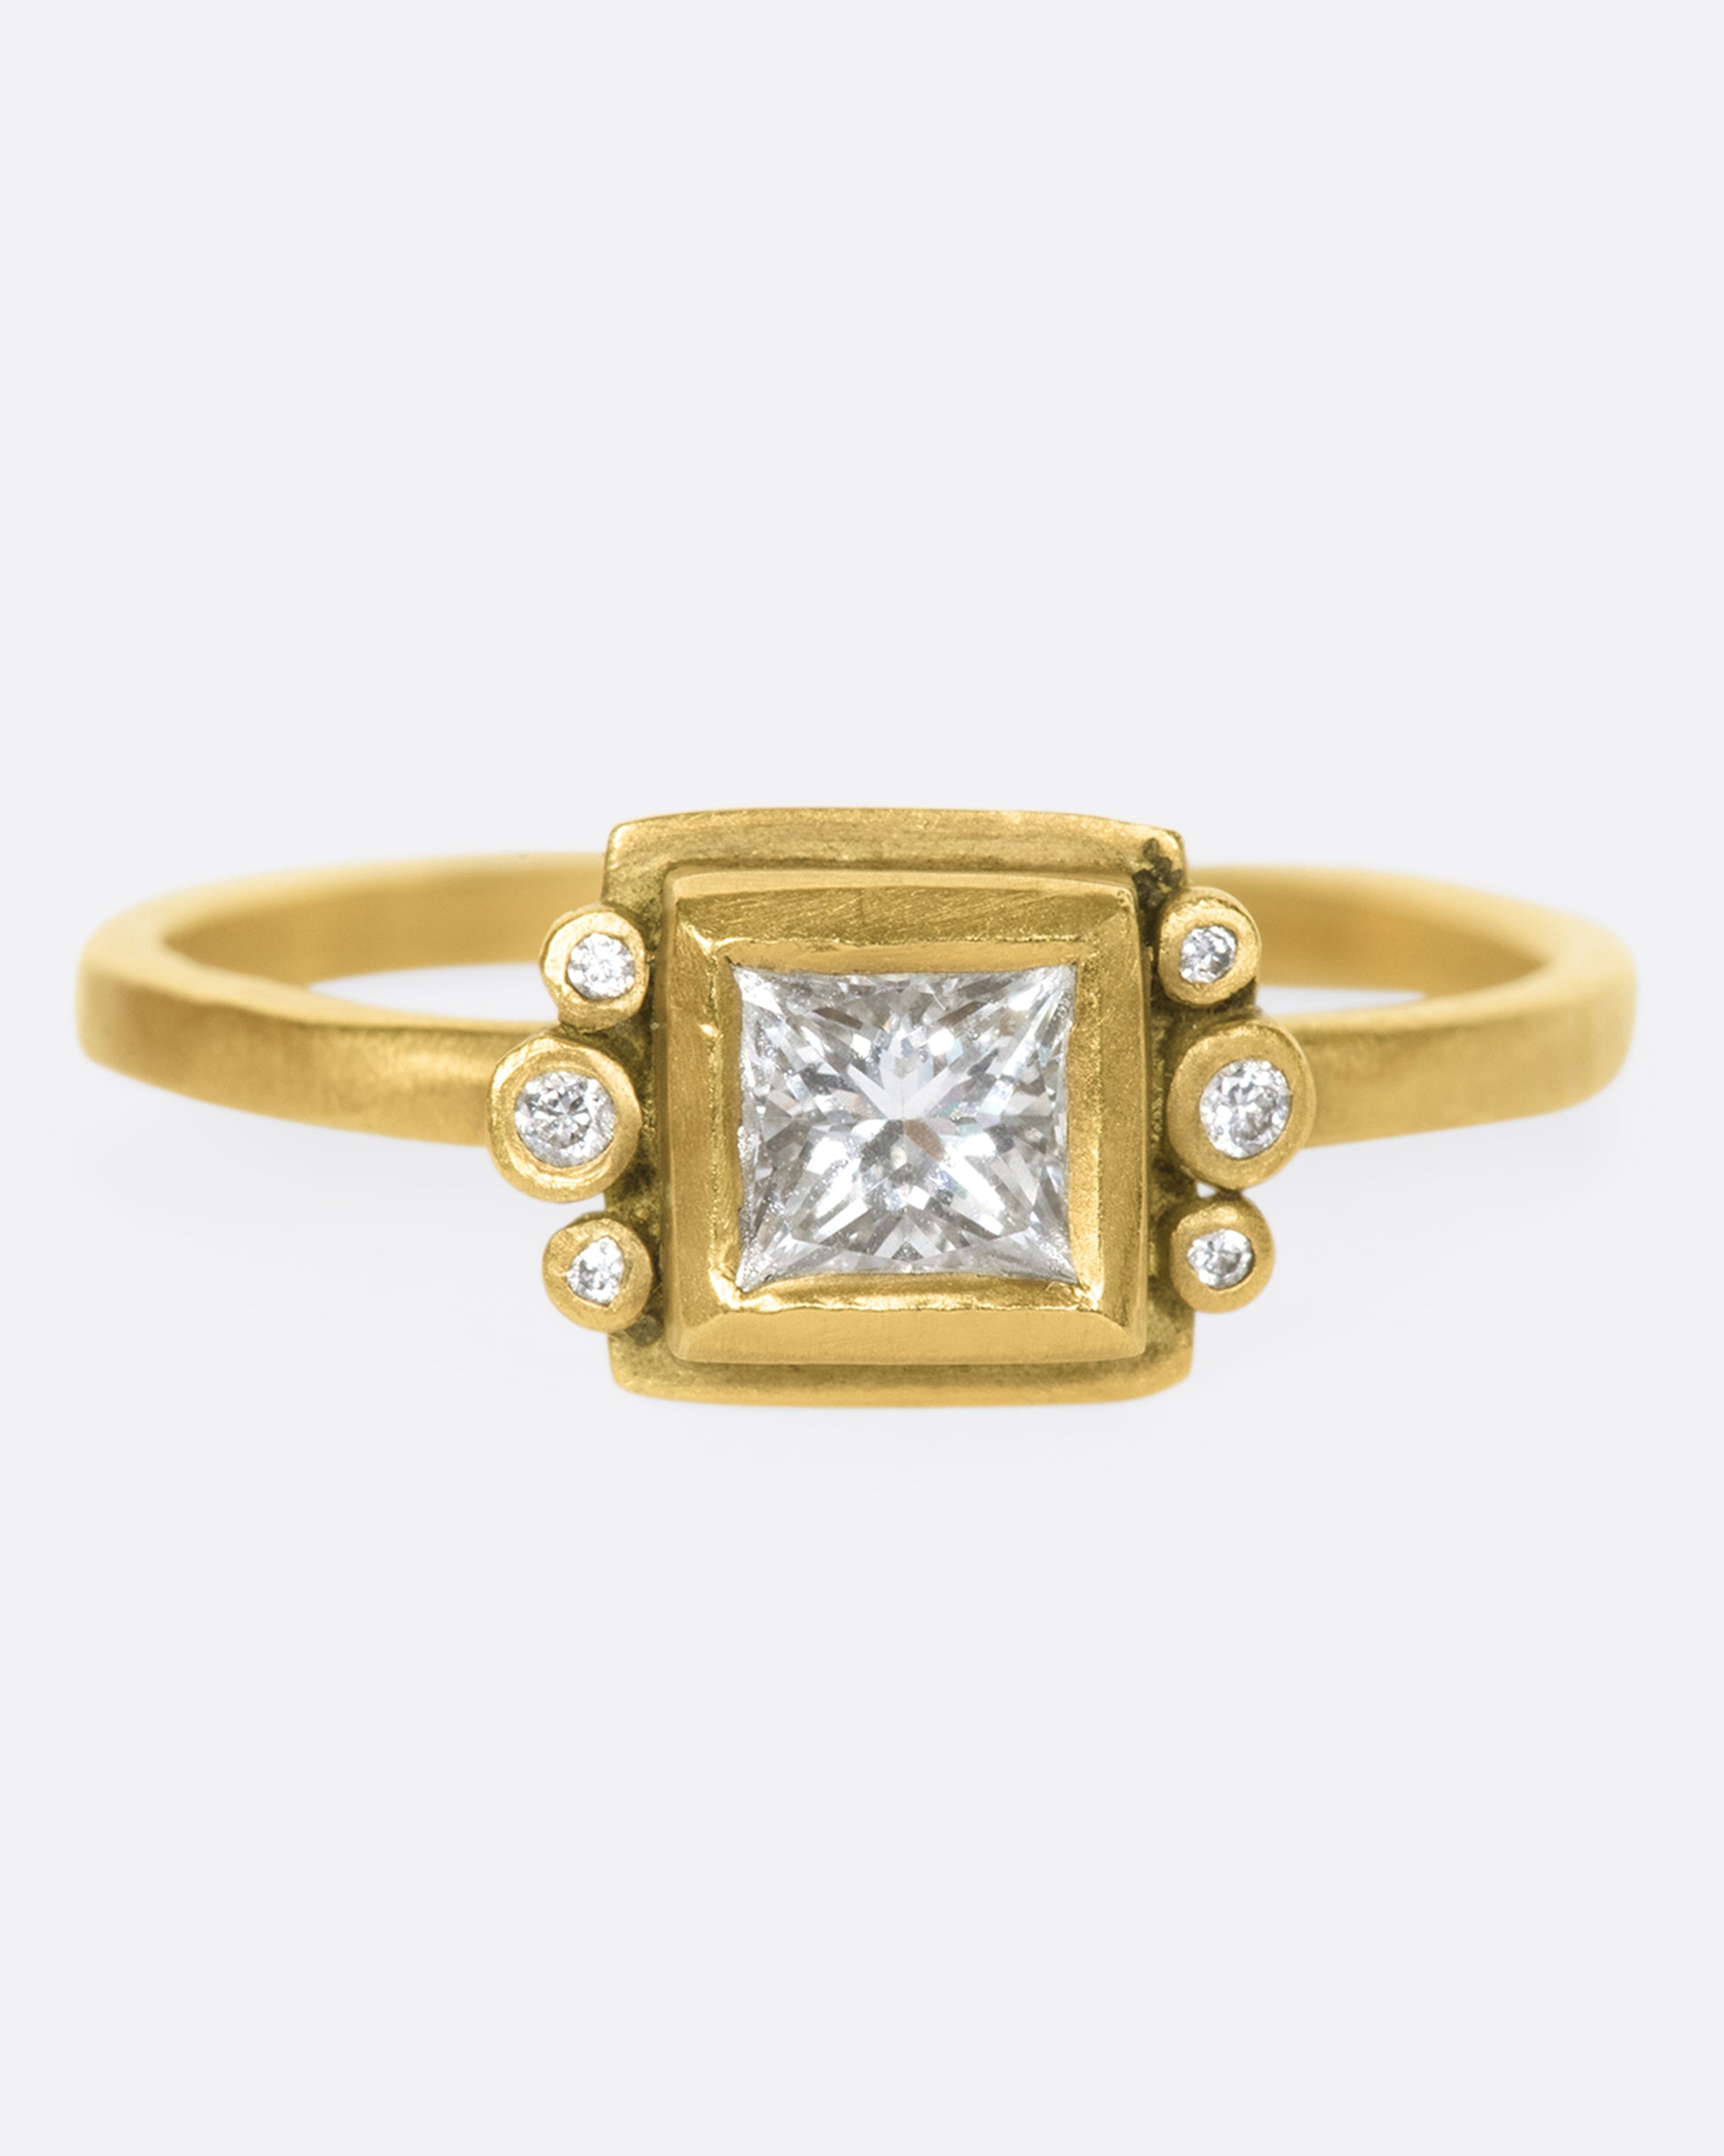 A square diamond in a matching bezel with three round diamonds on either side.